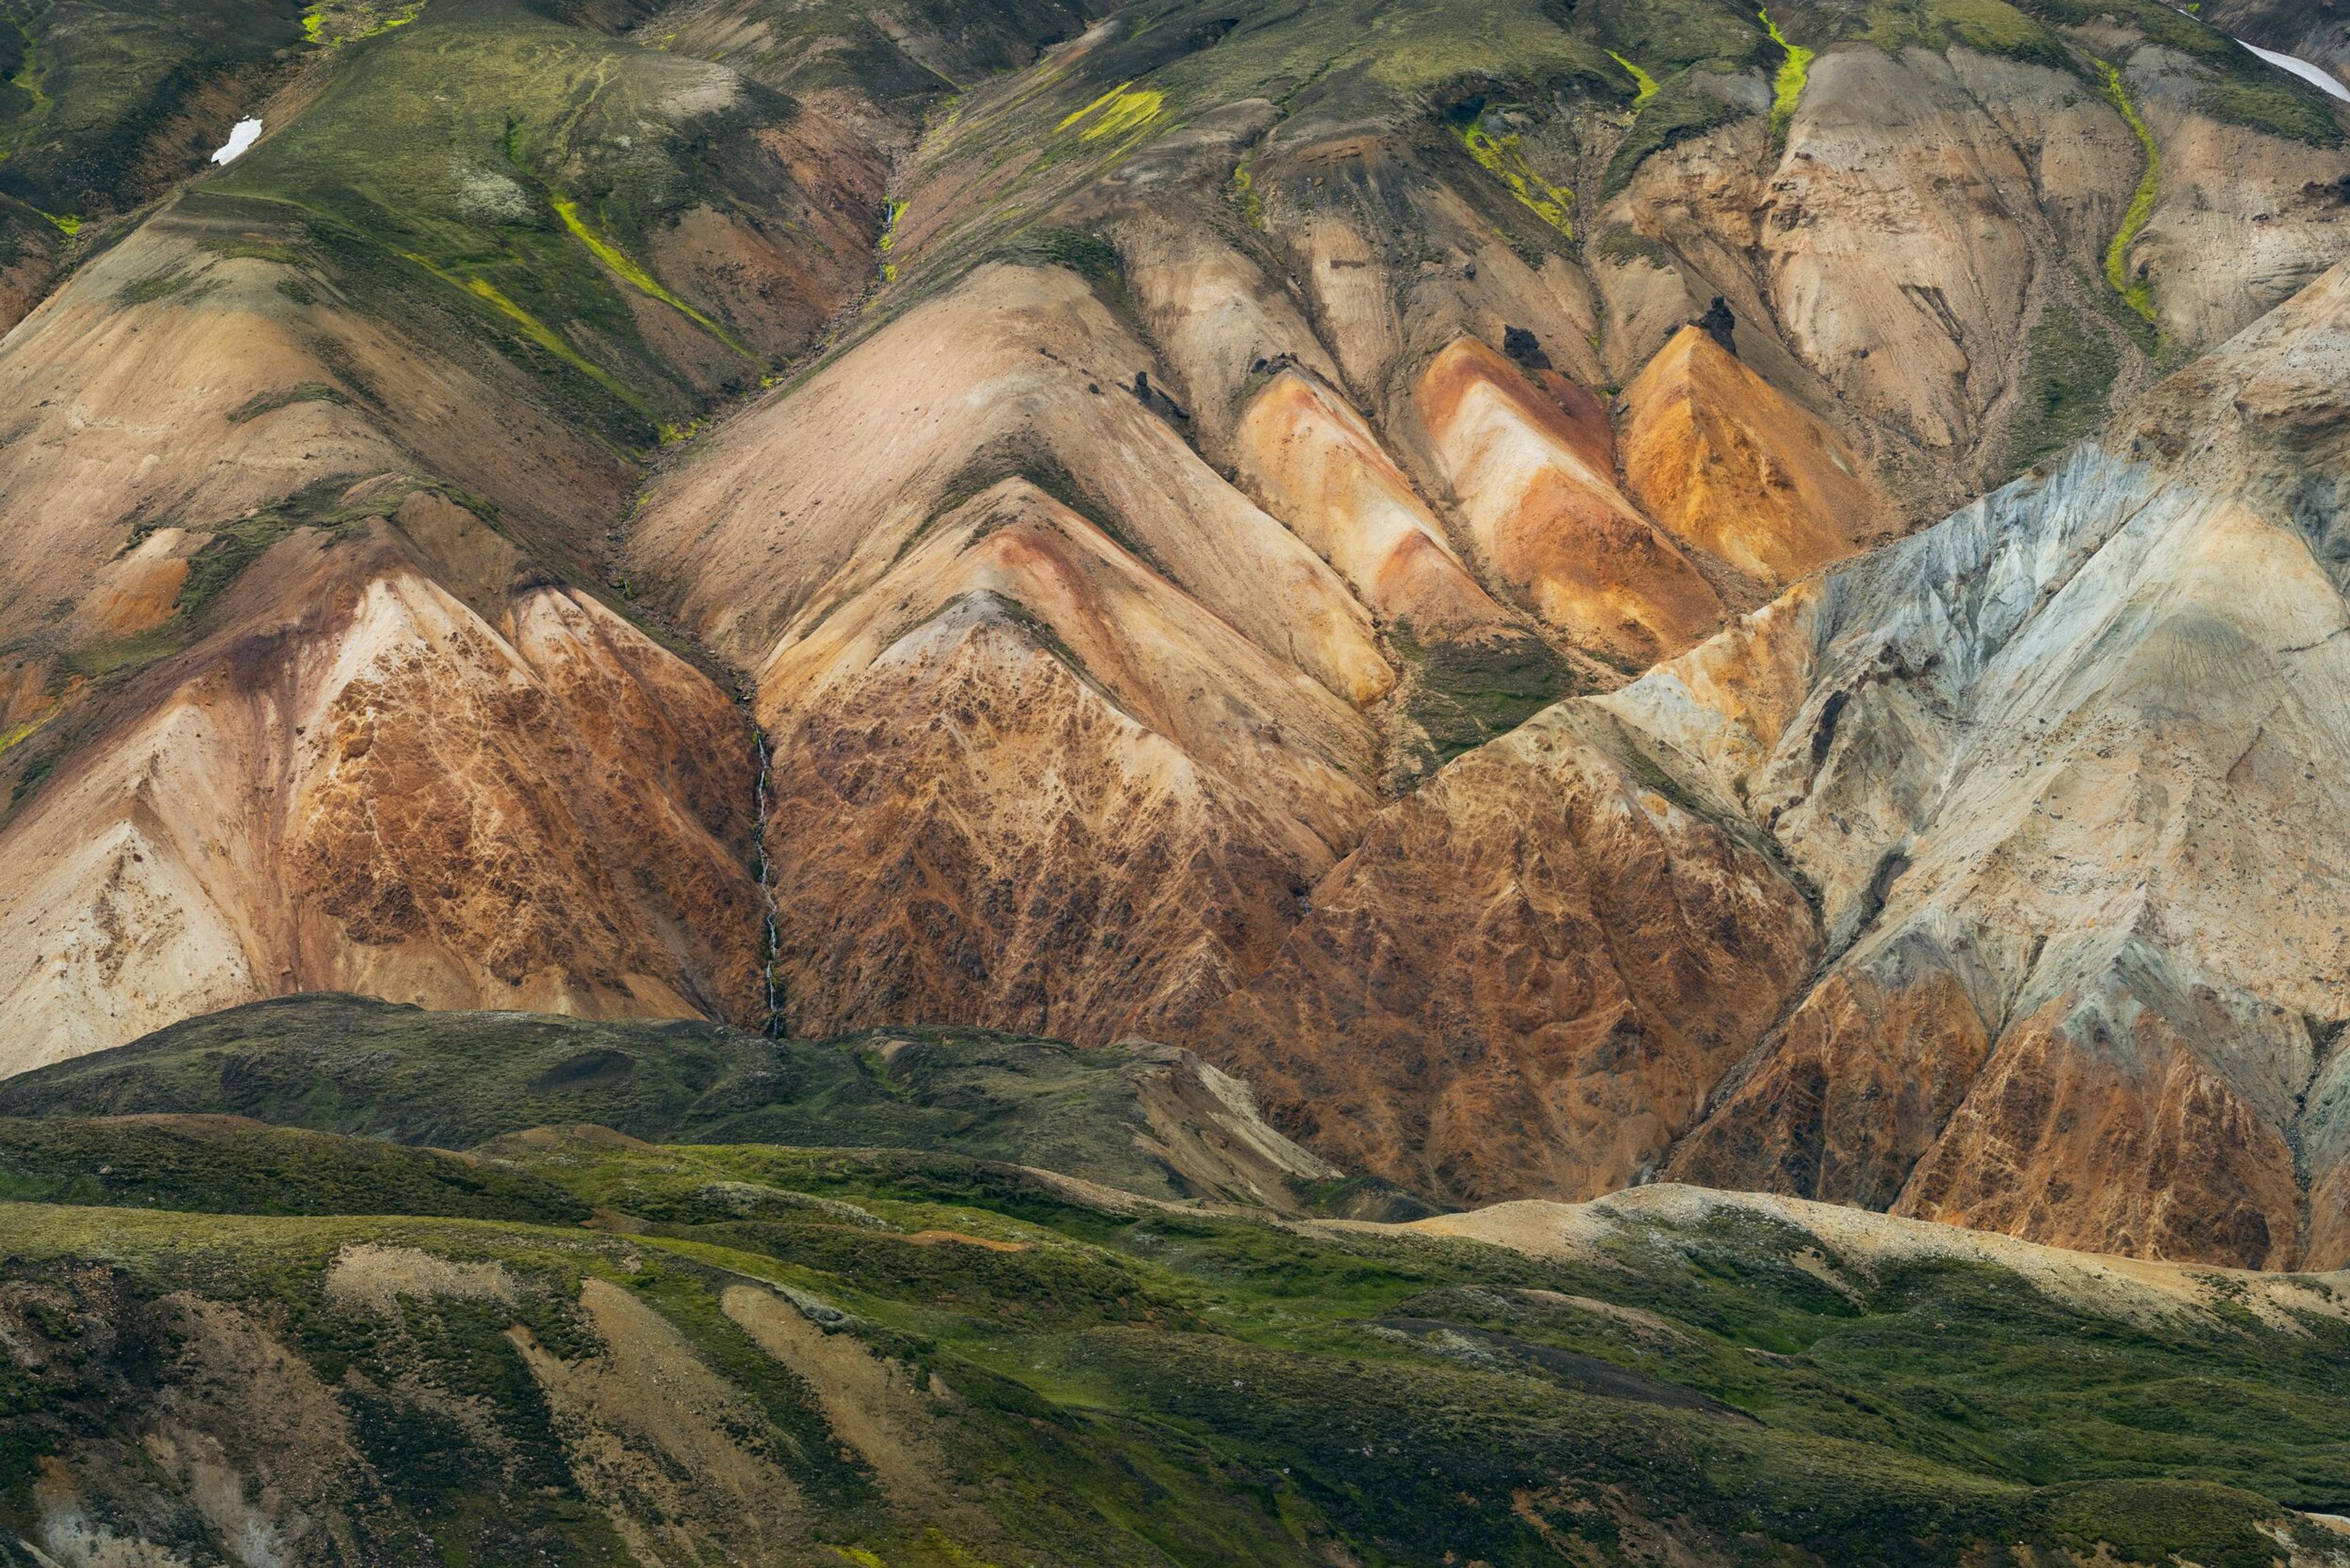 Aerial view of a rhyolite mountain formation in Iceland